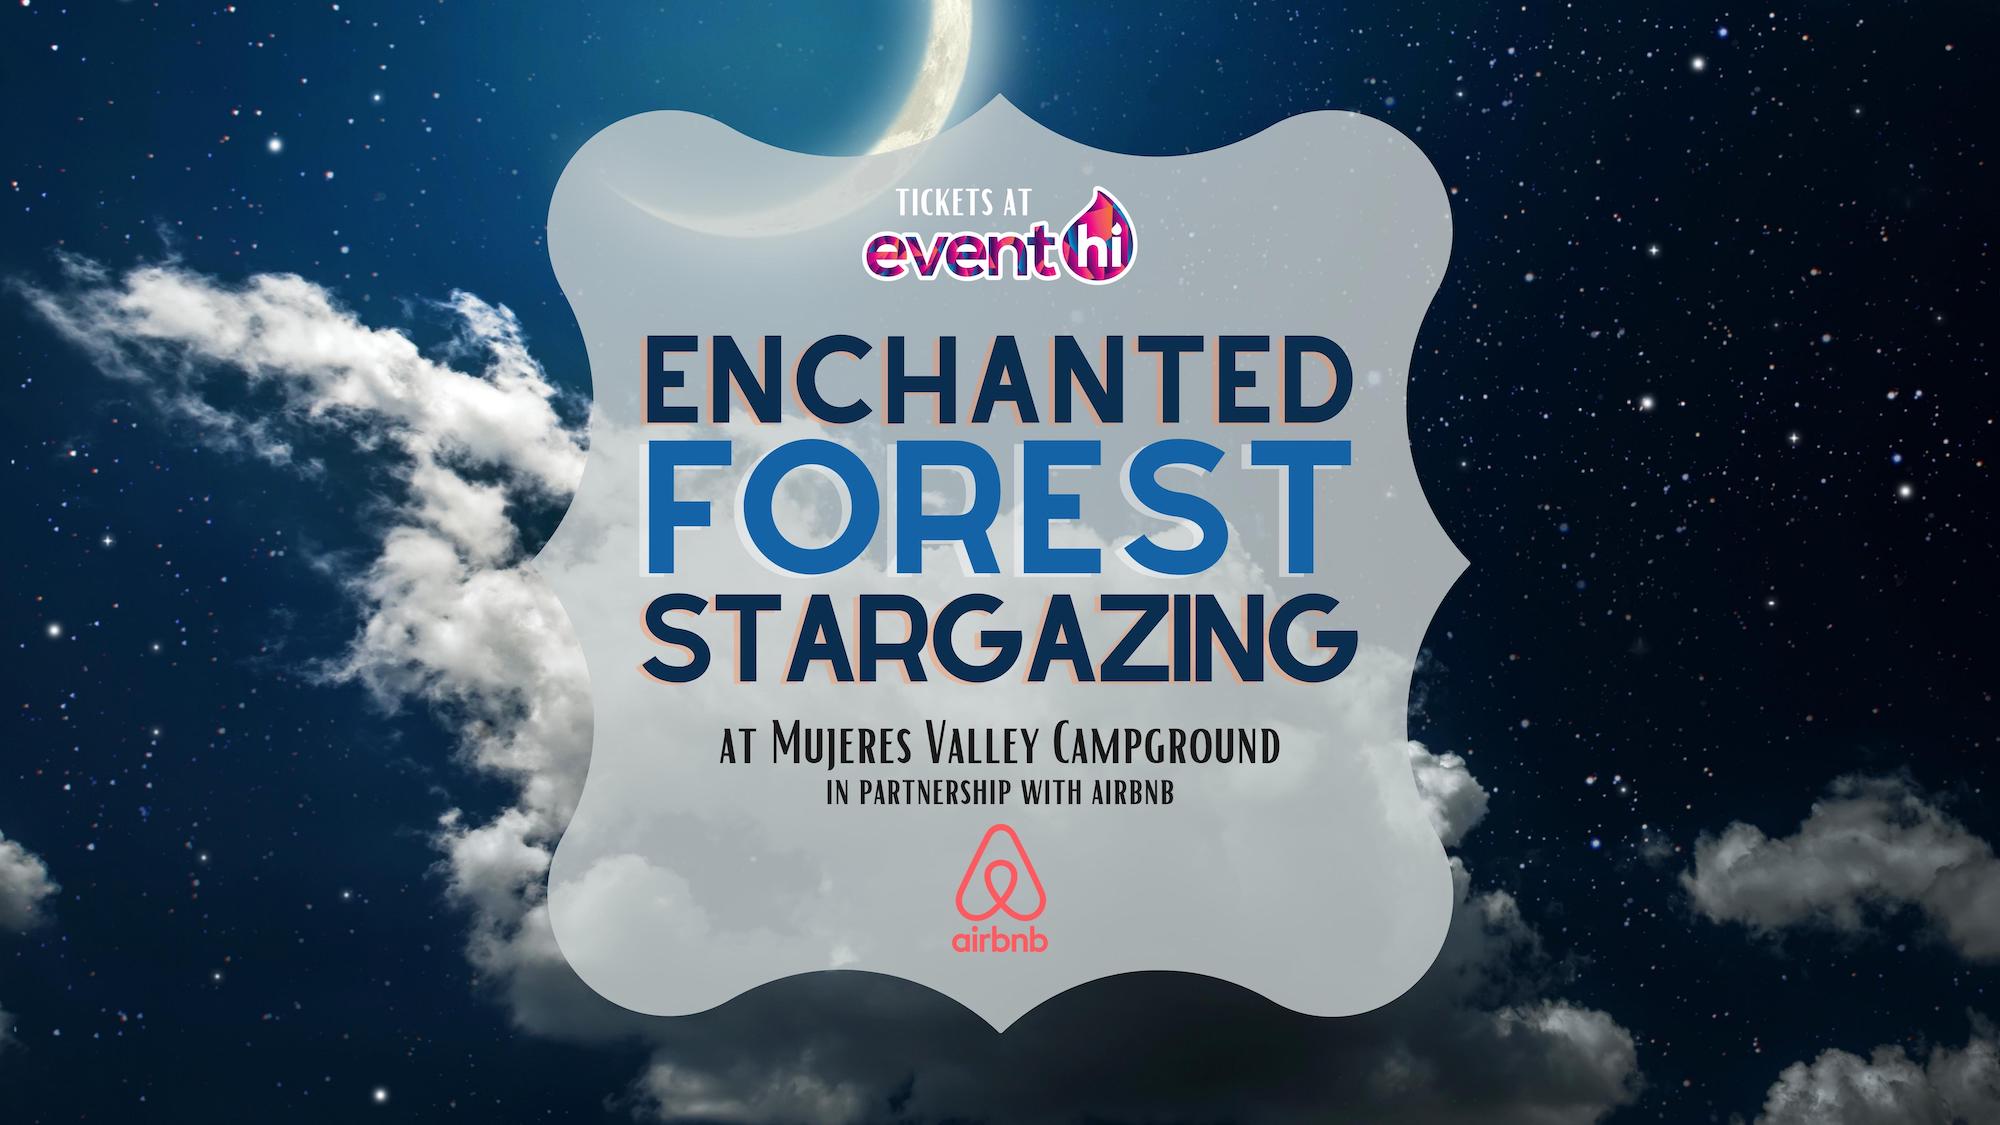 Enchanted Forest Stargazing